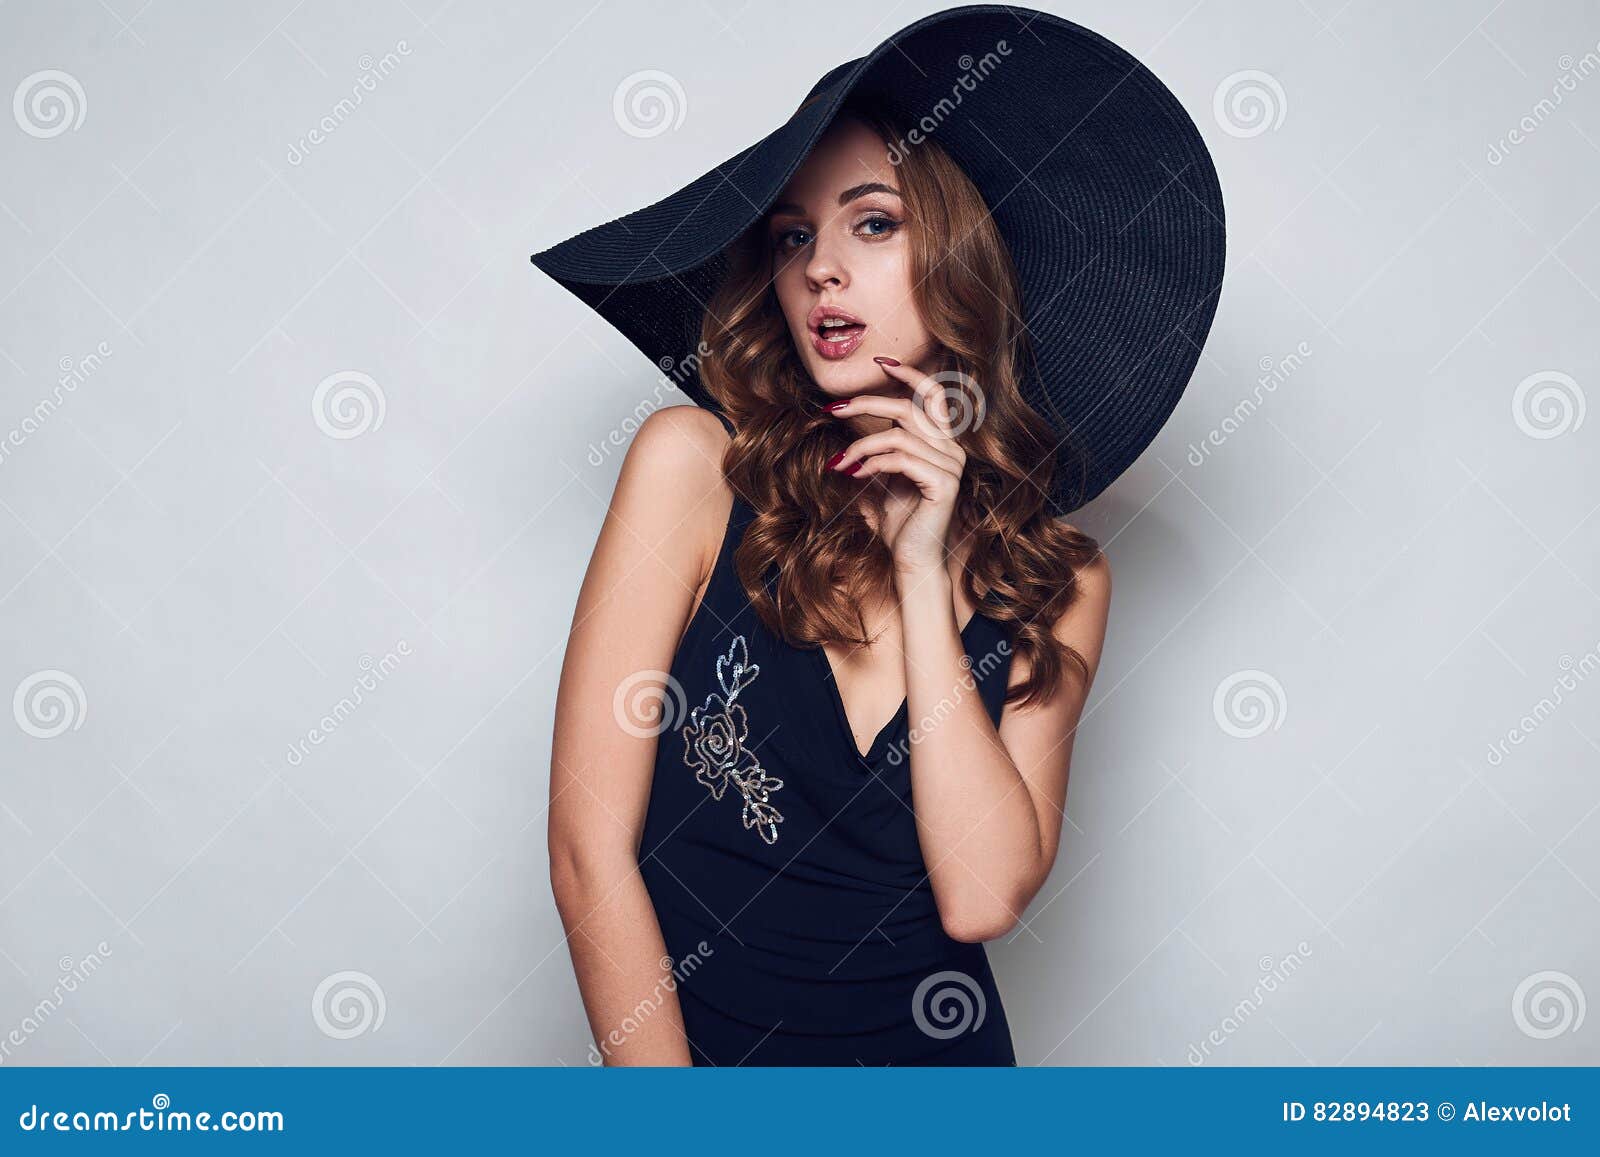 Elegant Beautiful Woman in a Black Dress and Hat Stock Image - Image of ...